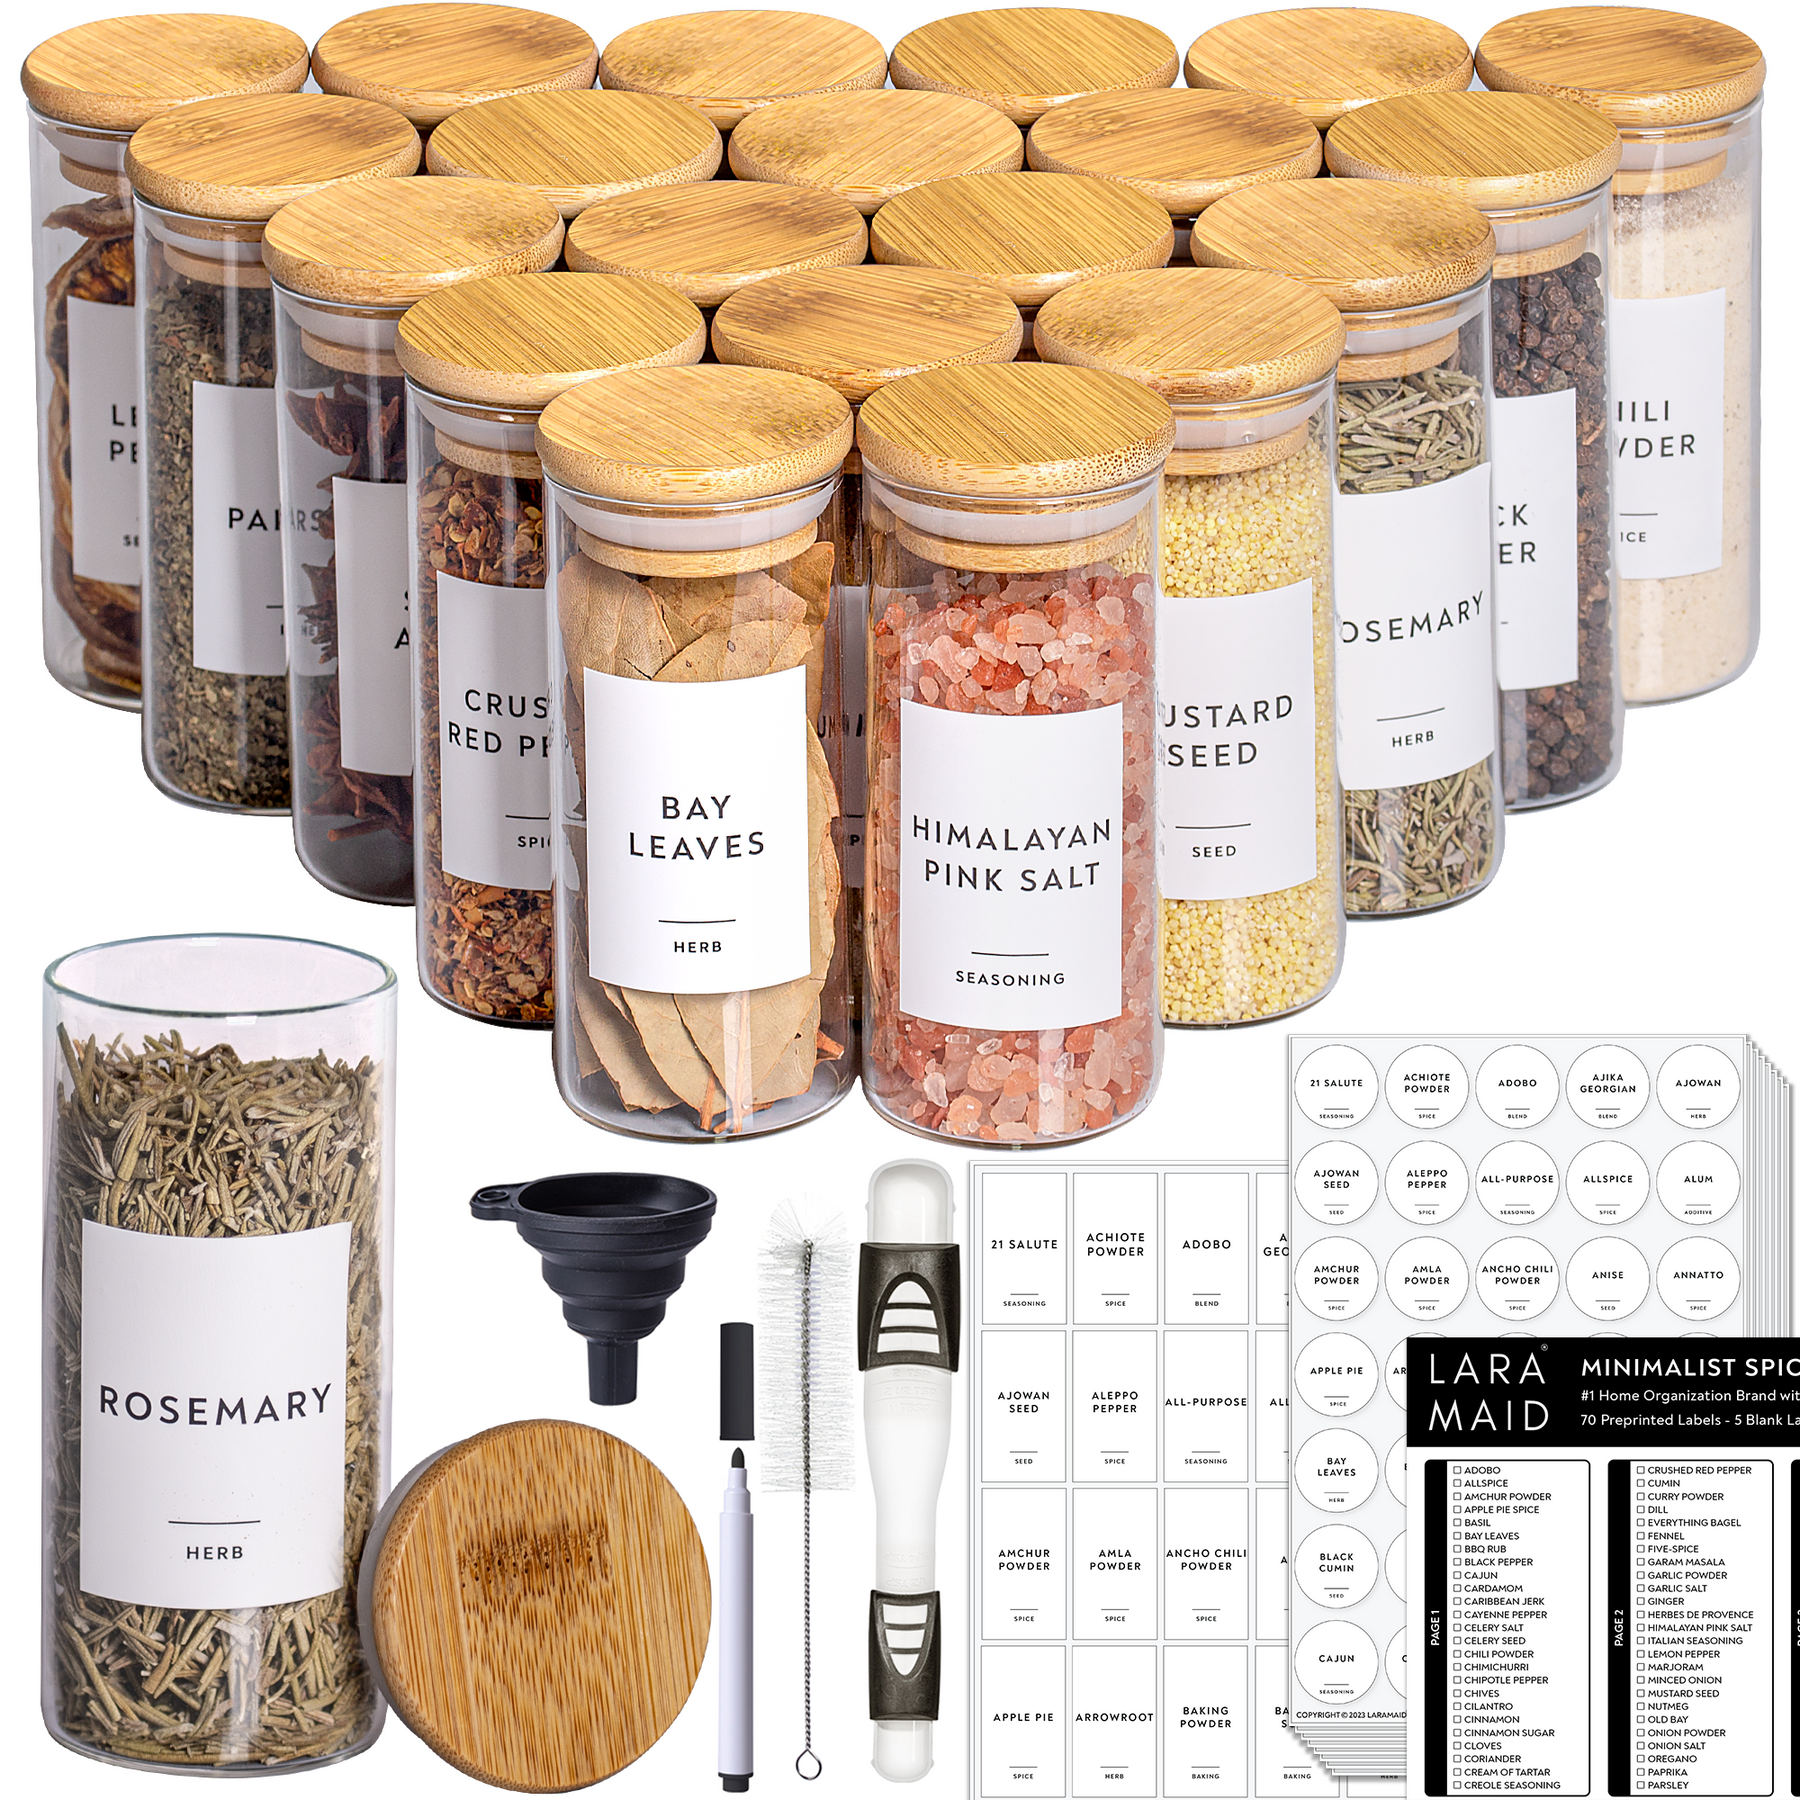 Laramaid 4oz 20Pack Spice Jars with Black Vinyl Spice Labels, Round Jar Canisters with Black Bamboo Lids, Adjustable Measuring Spoon, White Pen